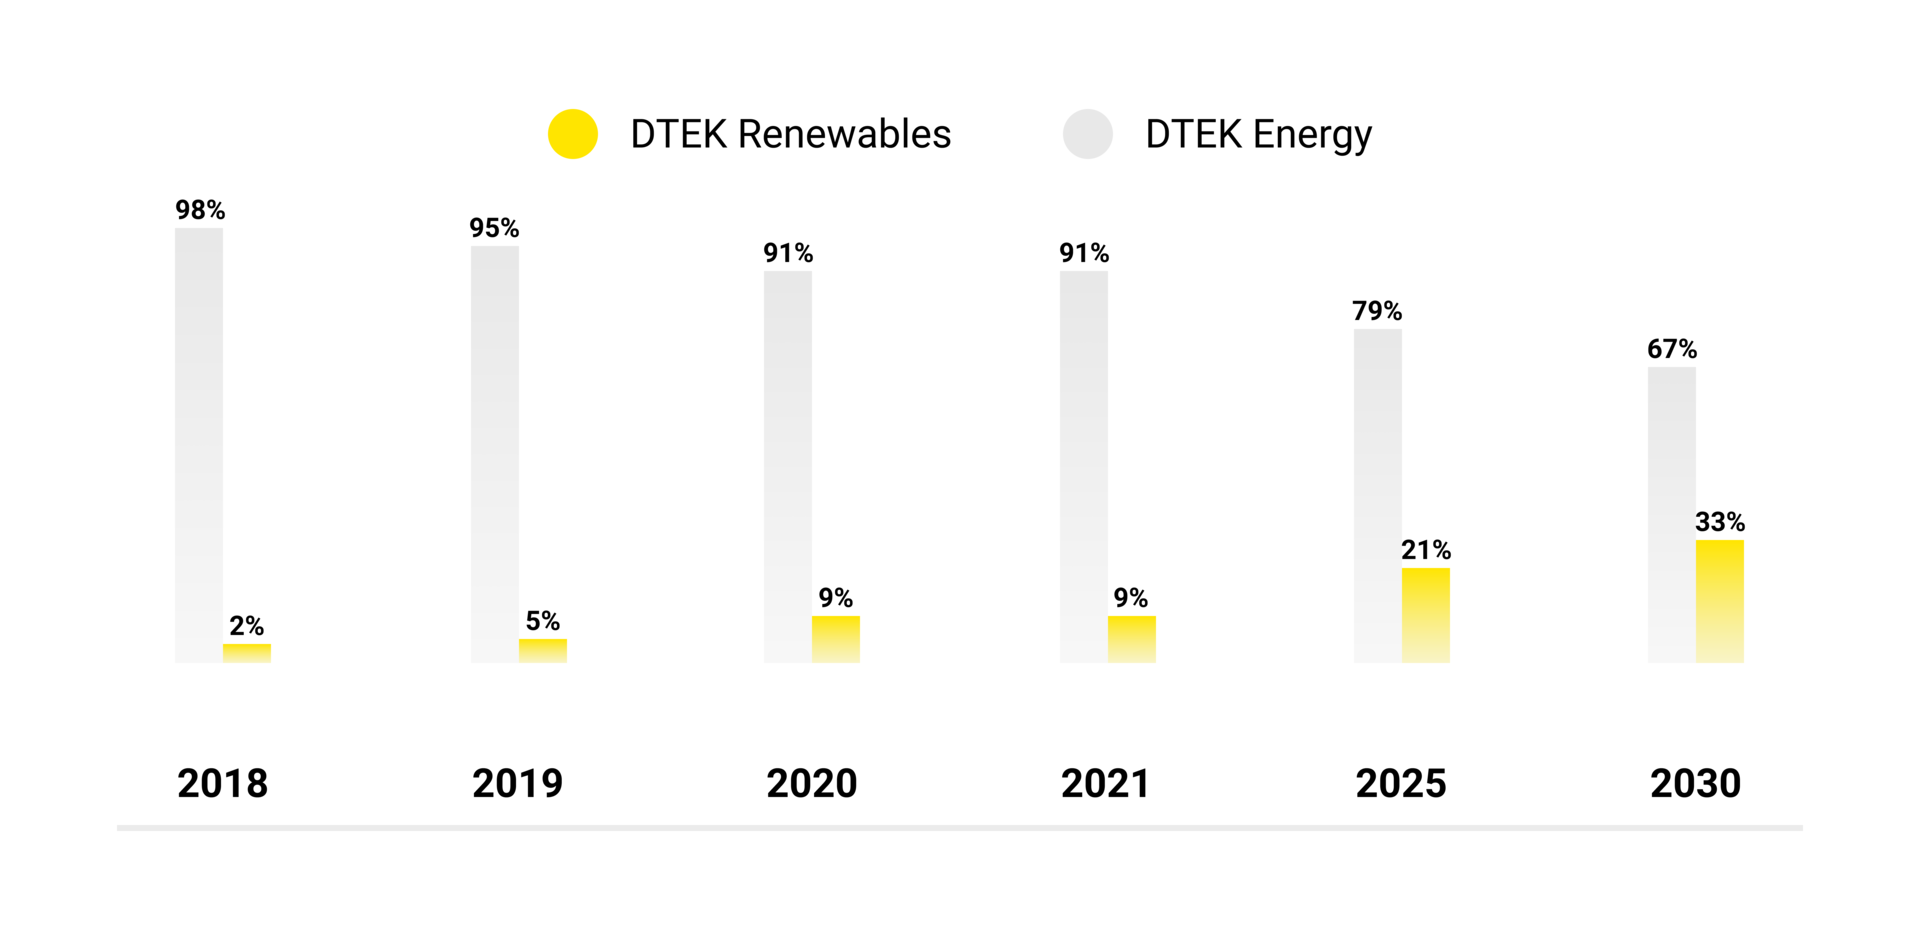 DTEK's strategic goal is to achieve carbon neutrality by 2040. Picture 4